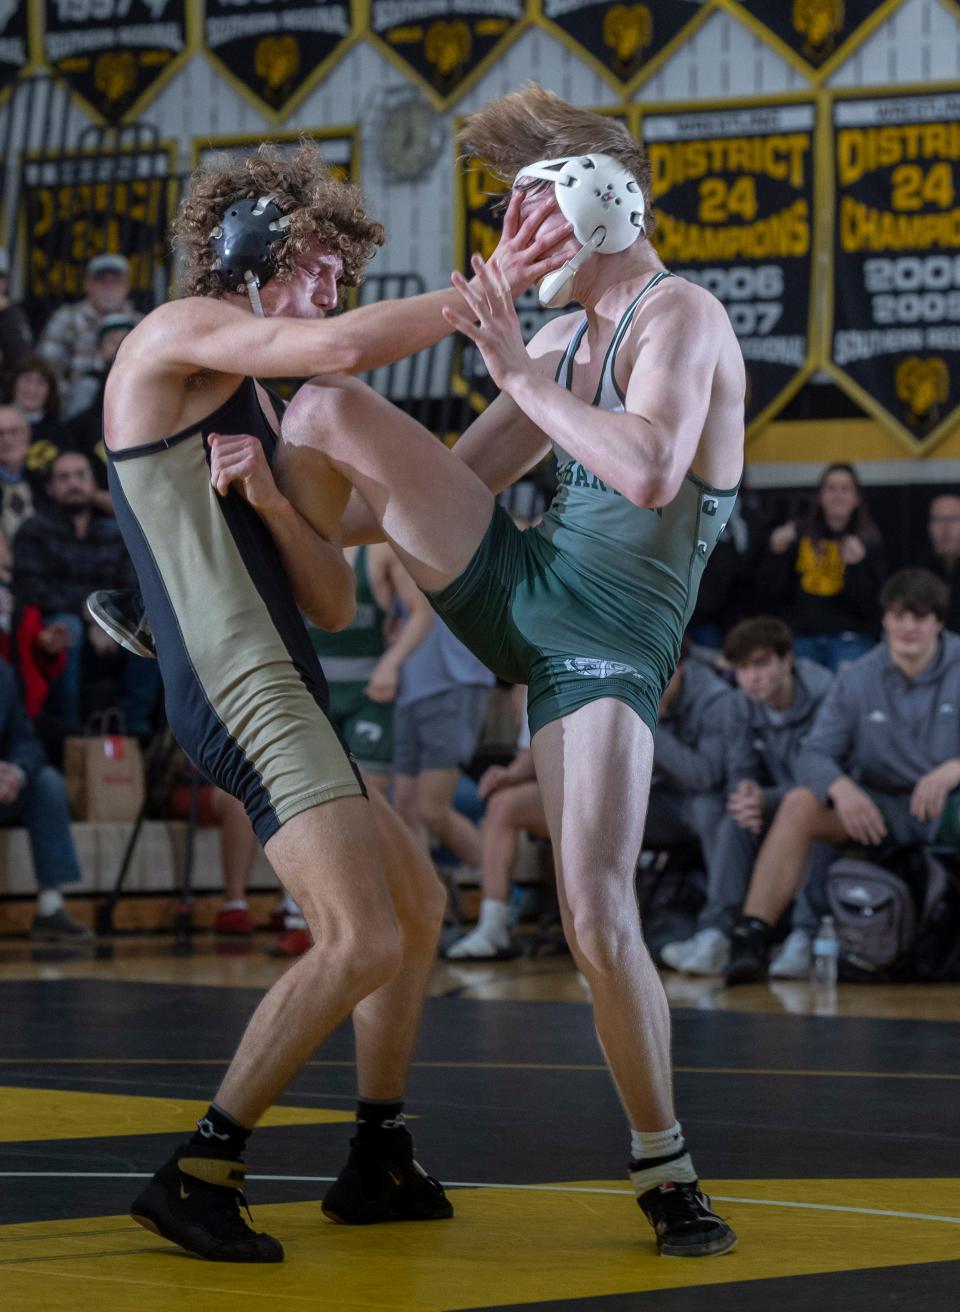 Southern's Wyatt Stout (left) recorded a come-from-behind 4-2 win over Delbarton's Trevor Jones in the 132-pound bout. Delbarton won the match 48-12.